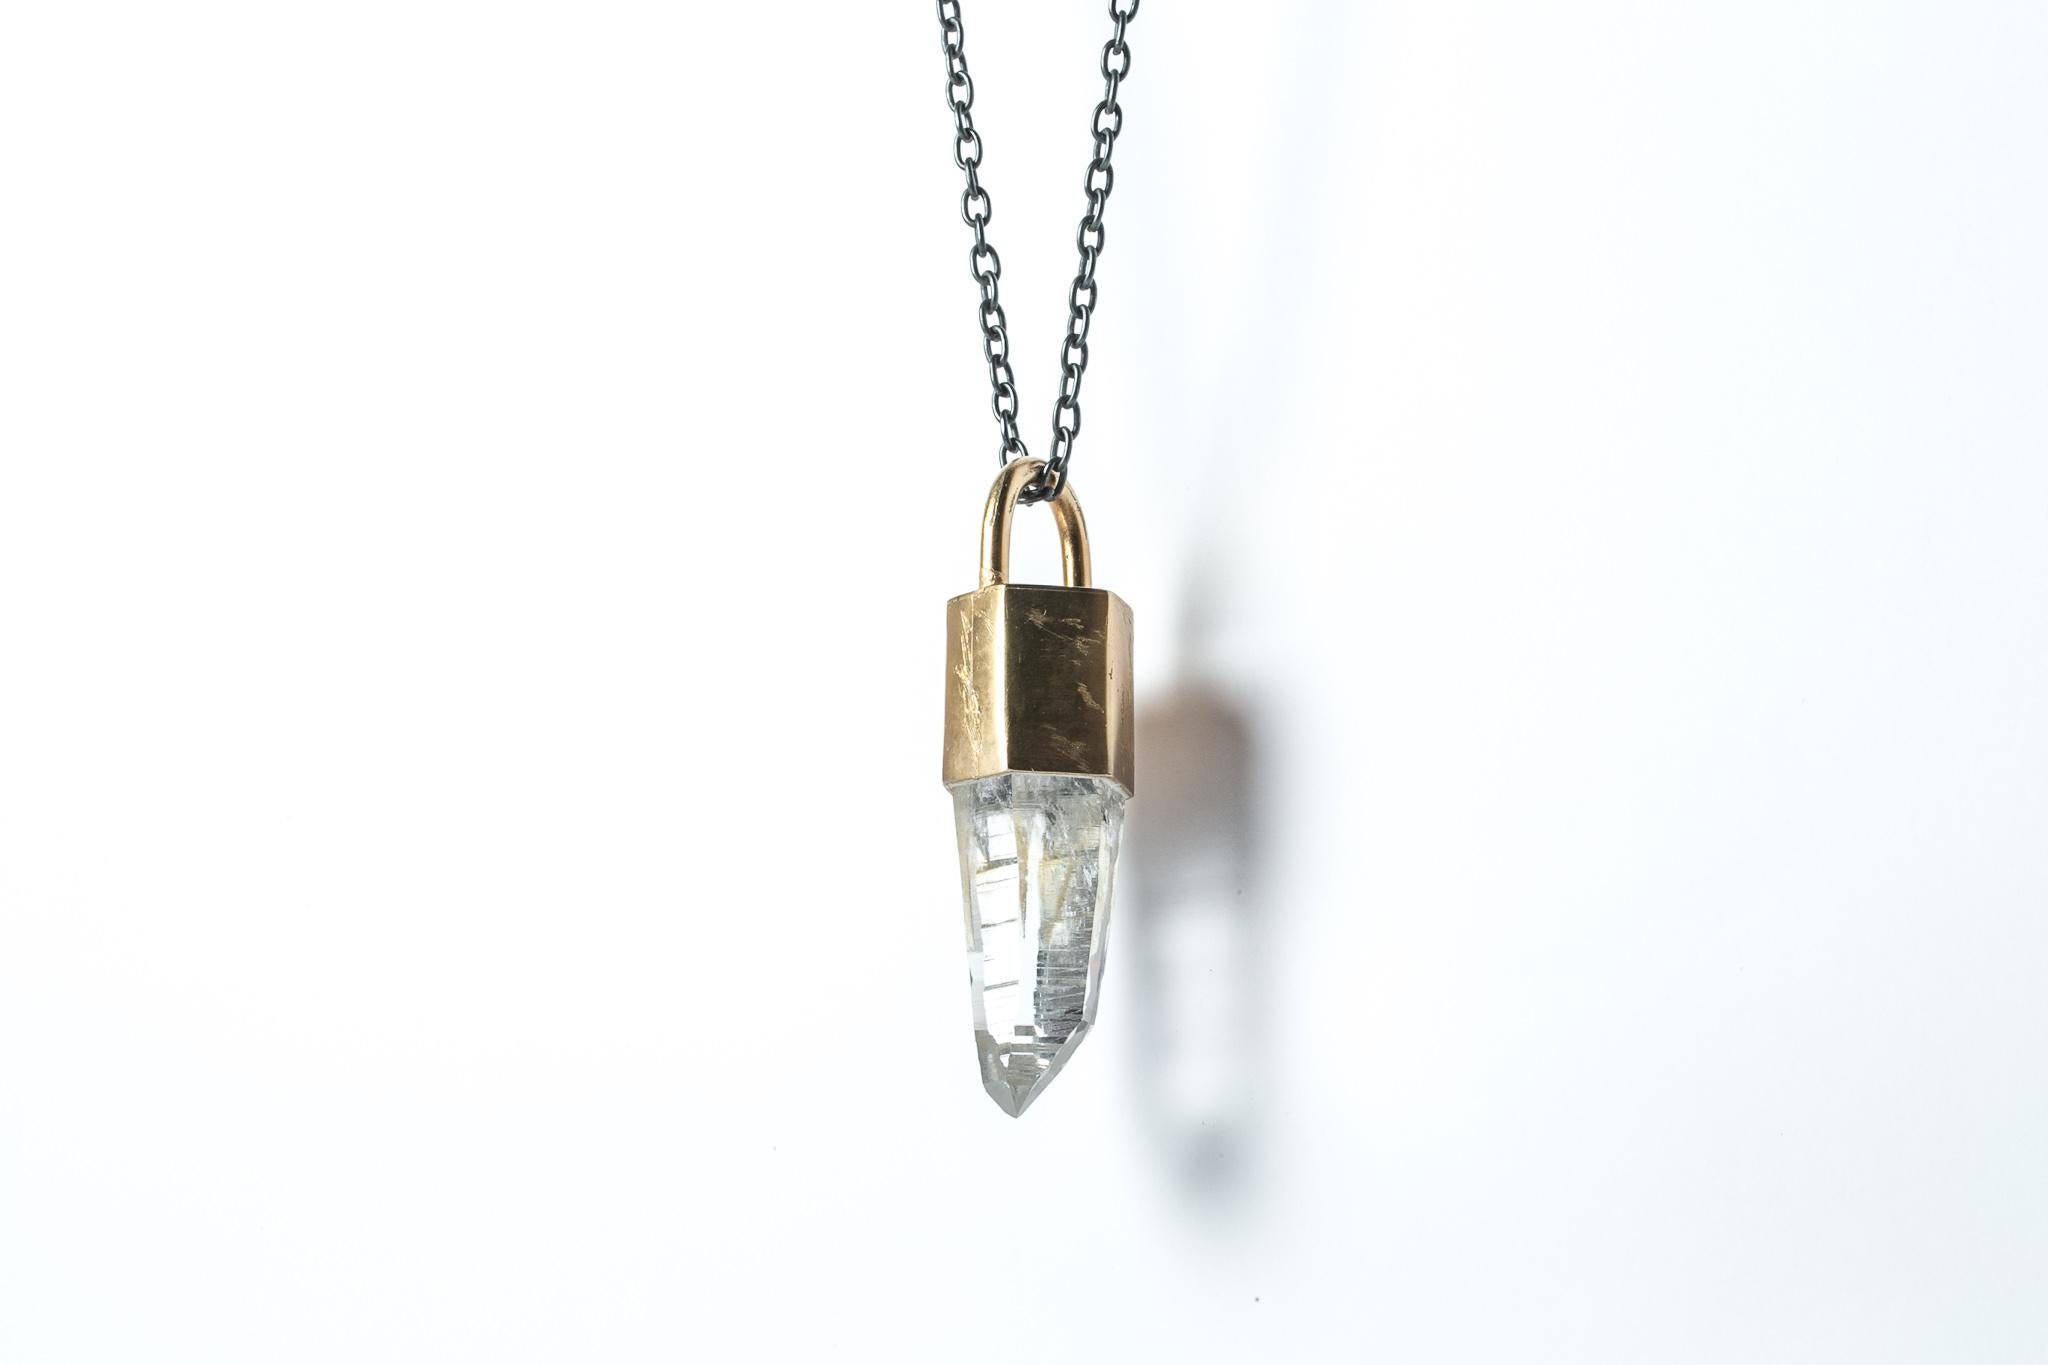 Talisman necklace in electroplated brass with 18k gold surface, oxidized sterling silver, and a rough of lemurian quartz. The Talisman series is an exploration into the power of natural crystals. Tools for Magic. The crystals used in these pieces